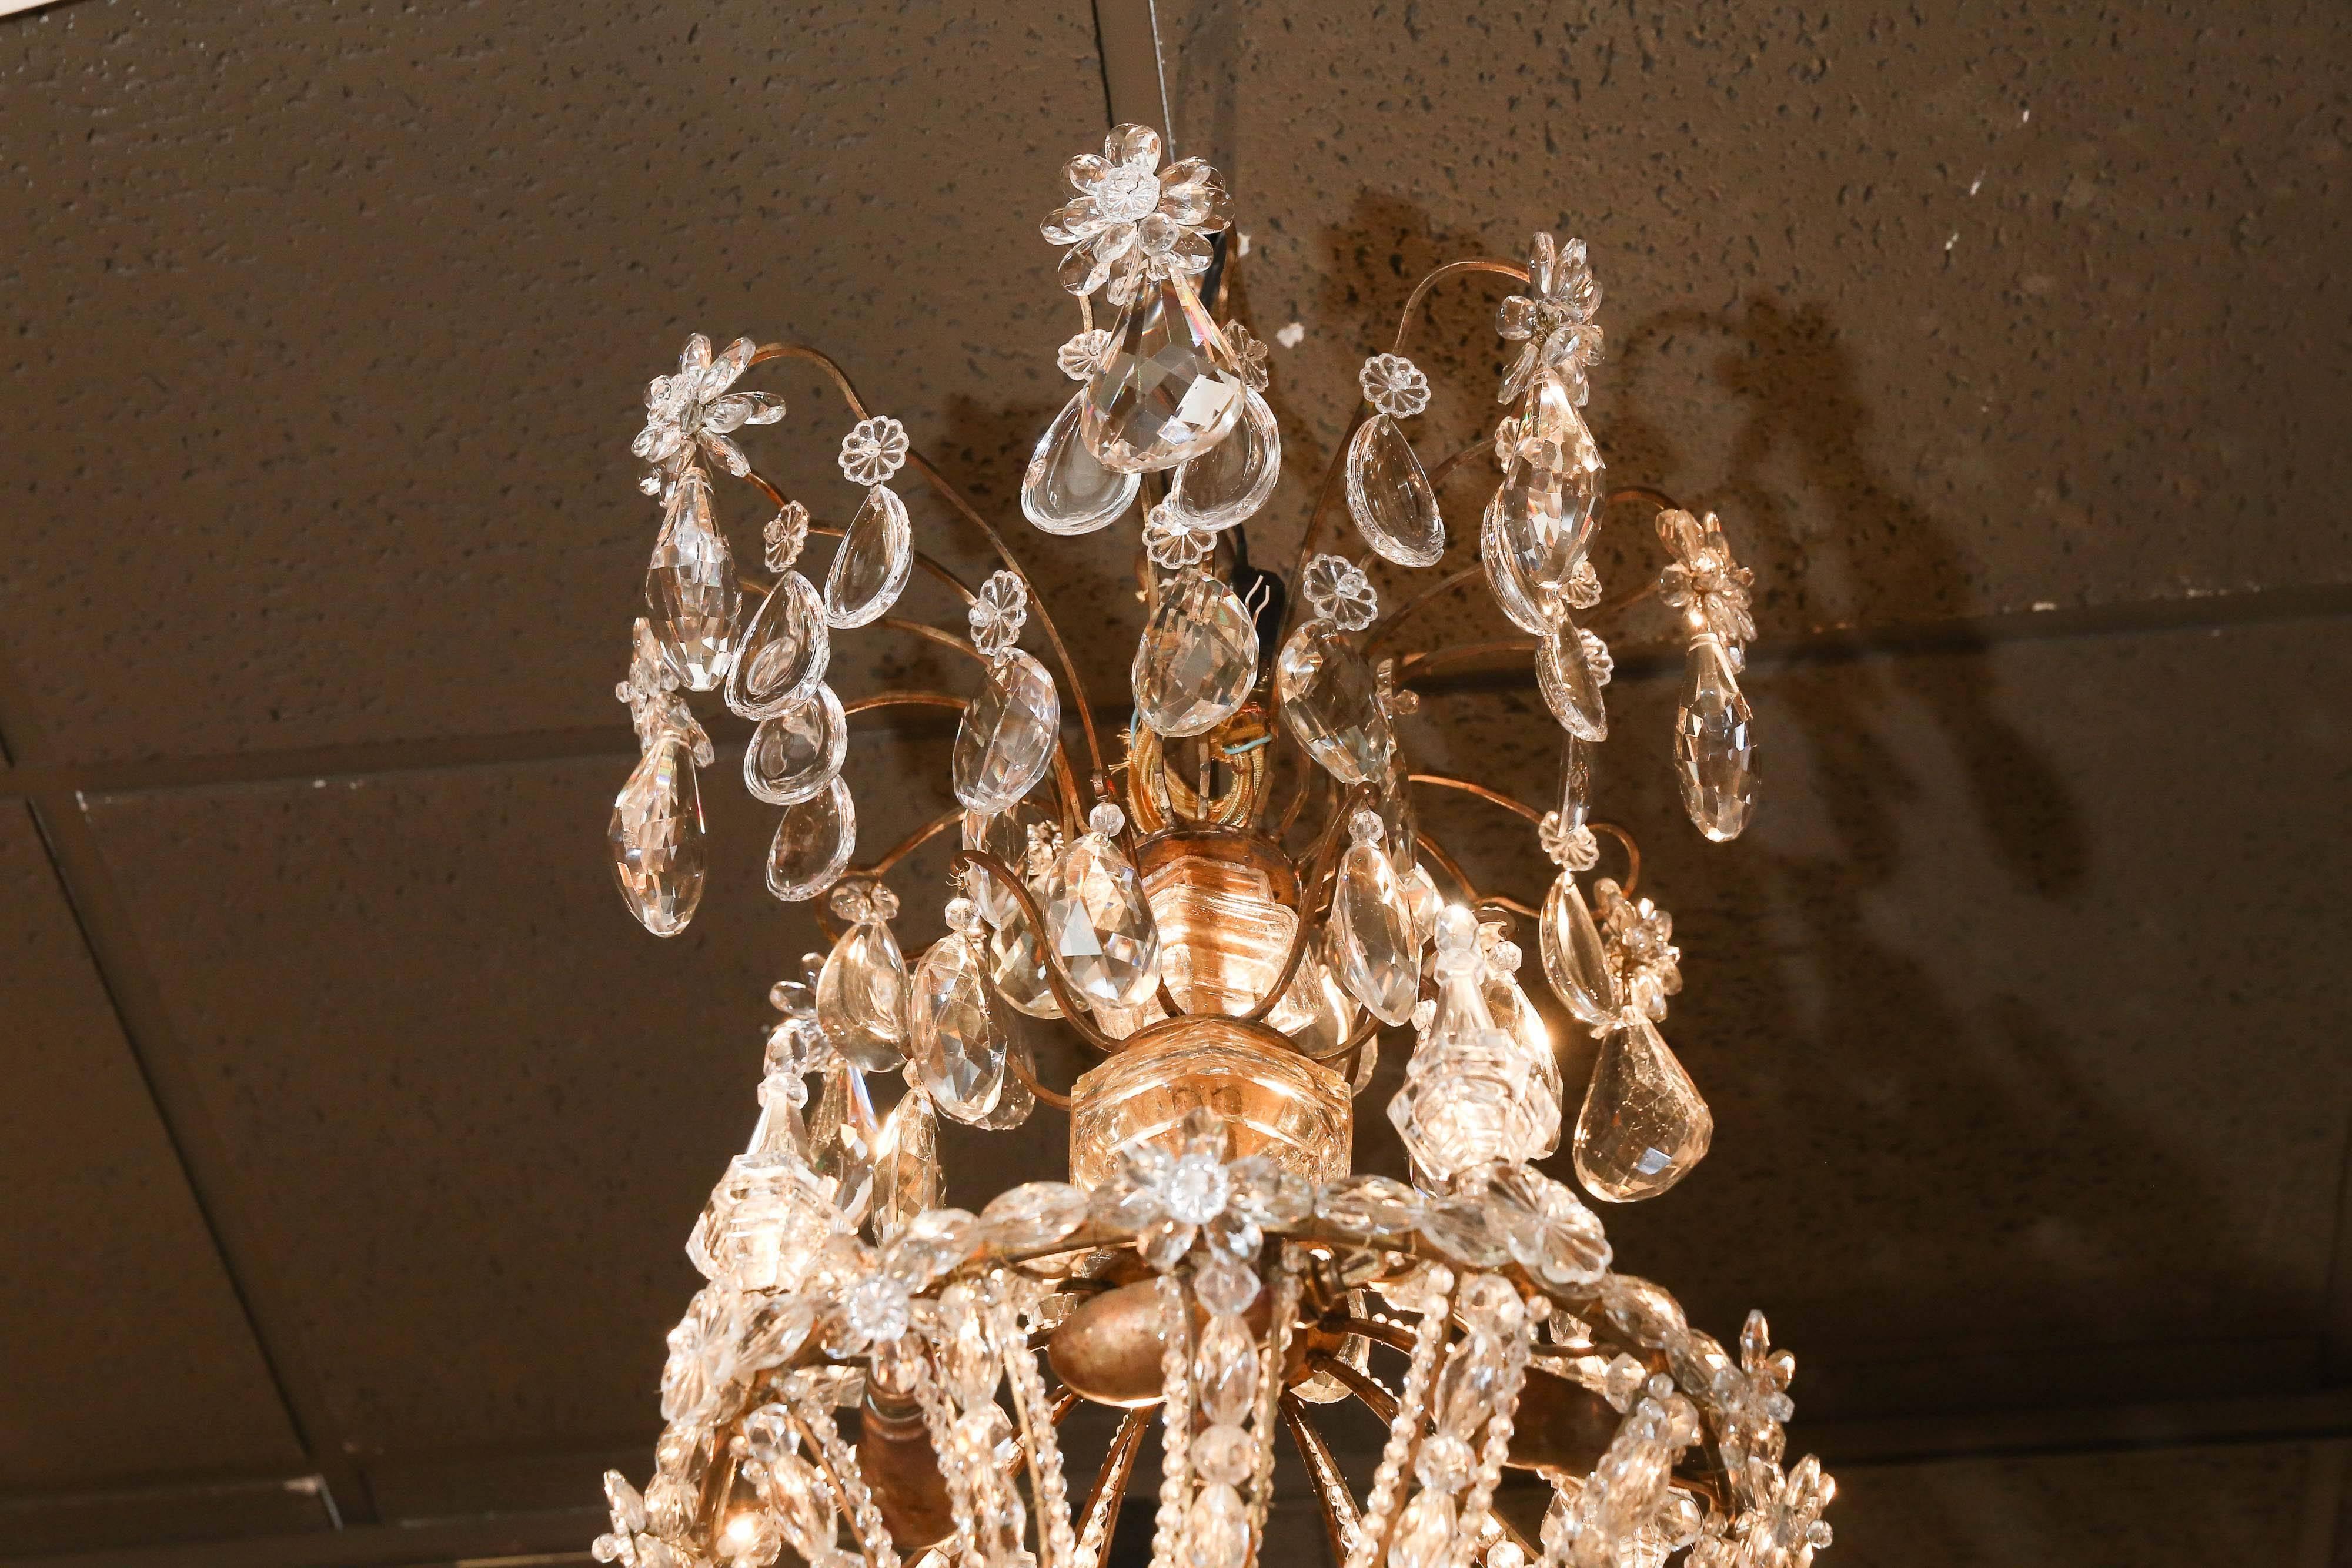 Impressive Bagues Chandelier, Large Size and Bronze and Crystal in swirl design 2